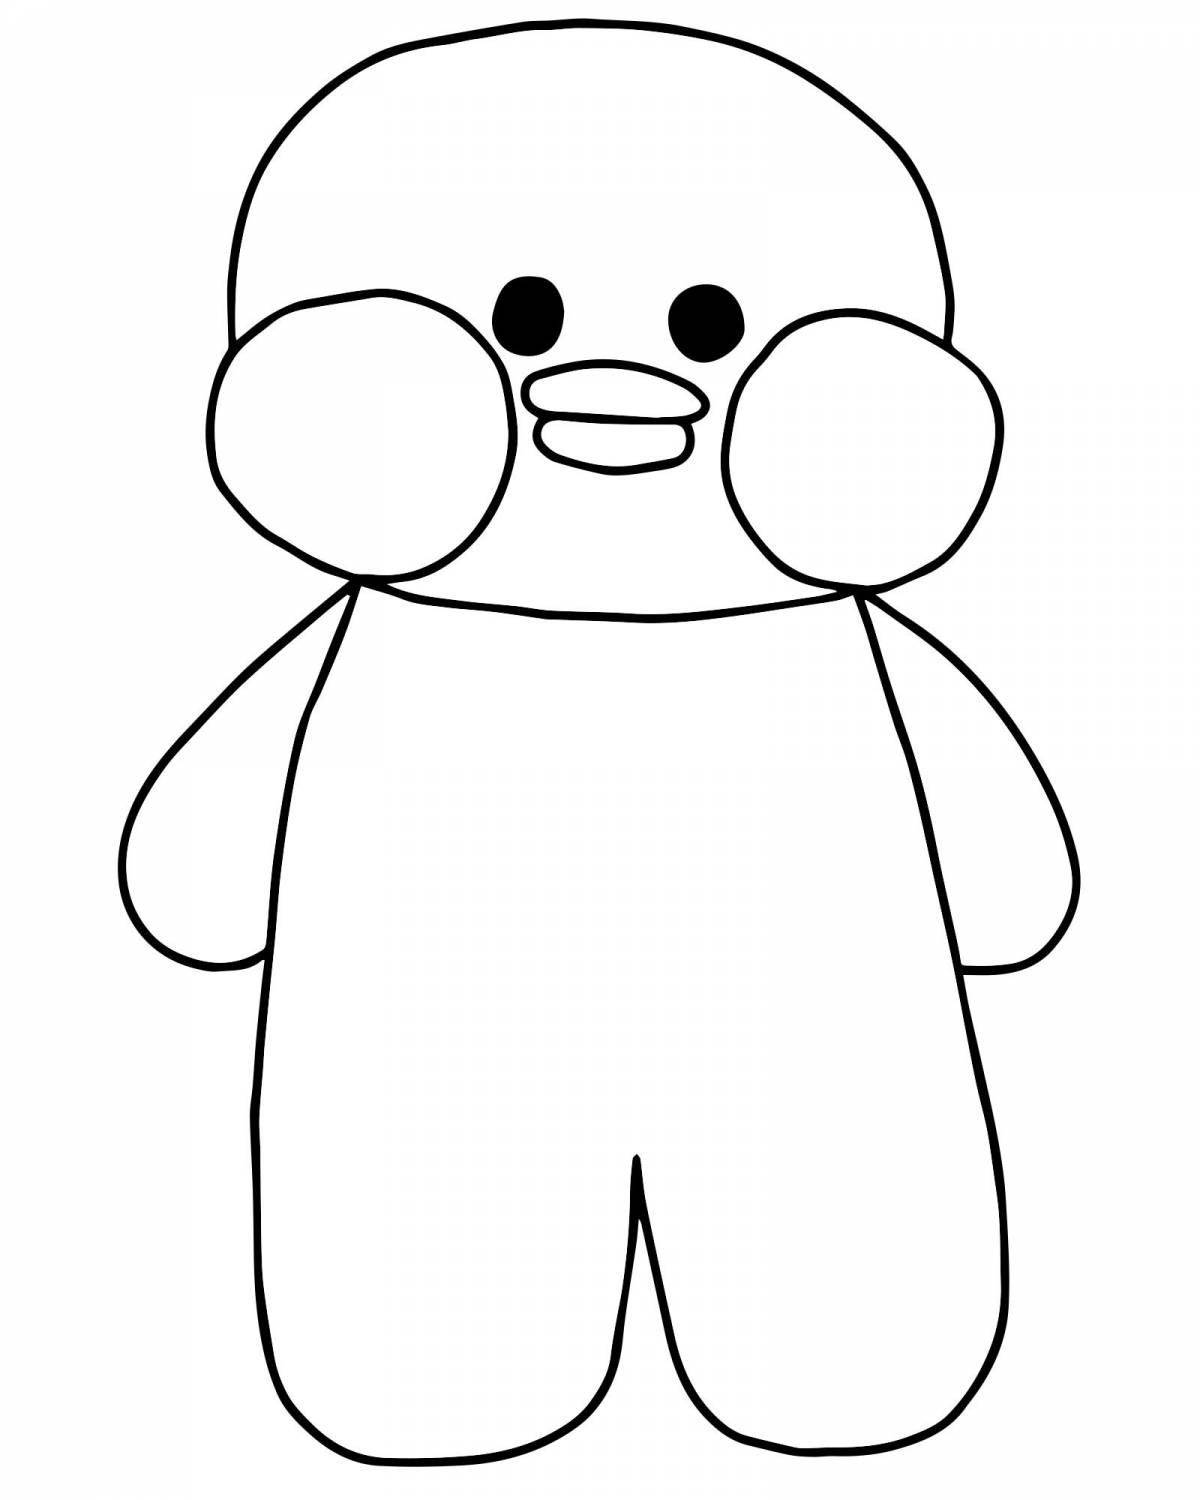 Lalafangfan duck coloring page